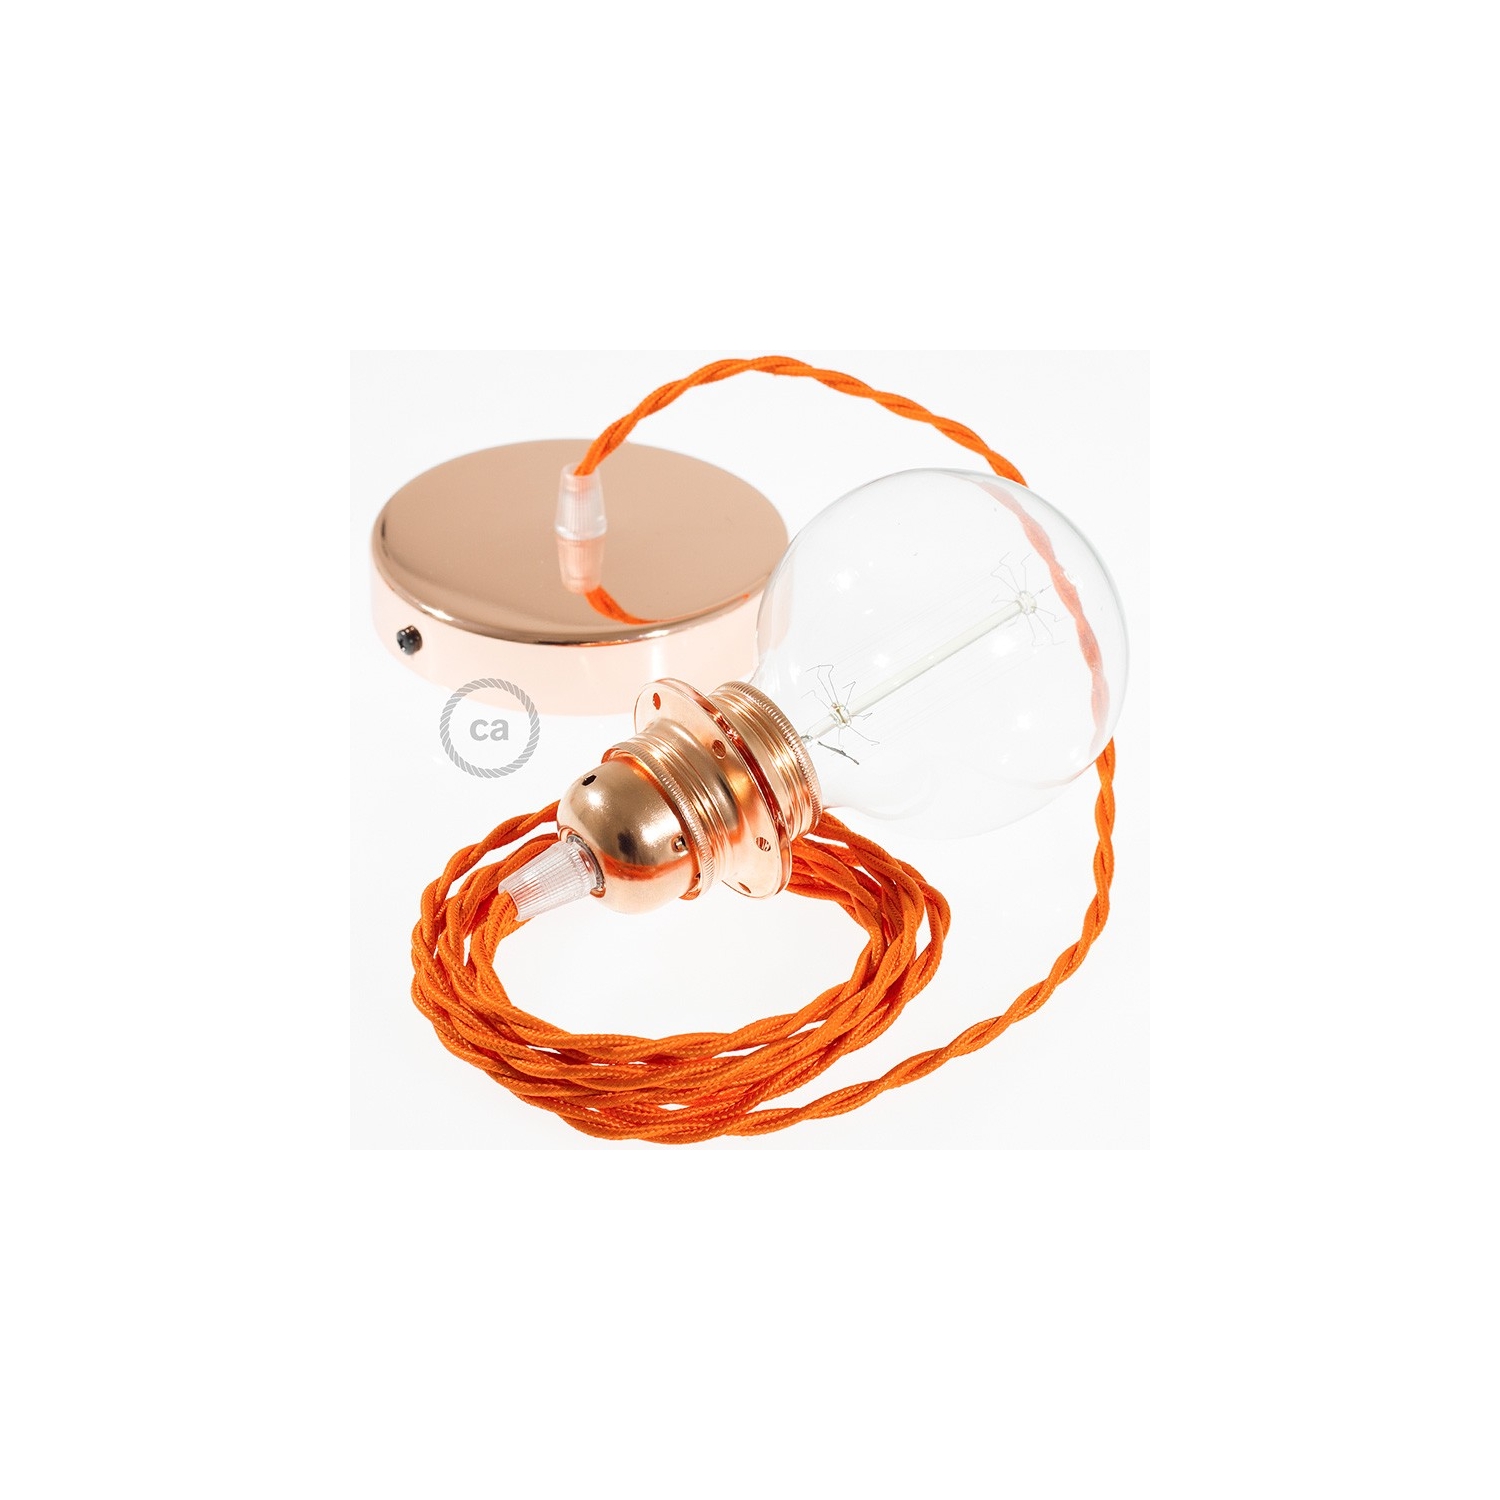 Pendant for lampshade, suspended lamp with Orange Rayon textile cable TM15